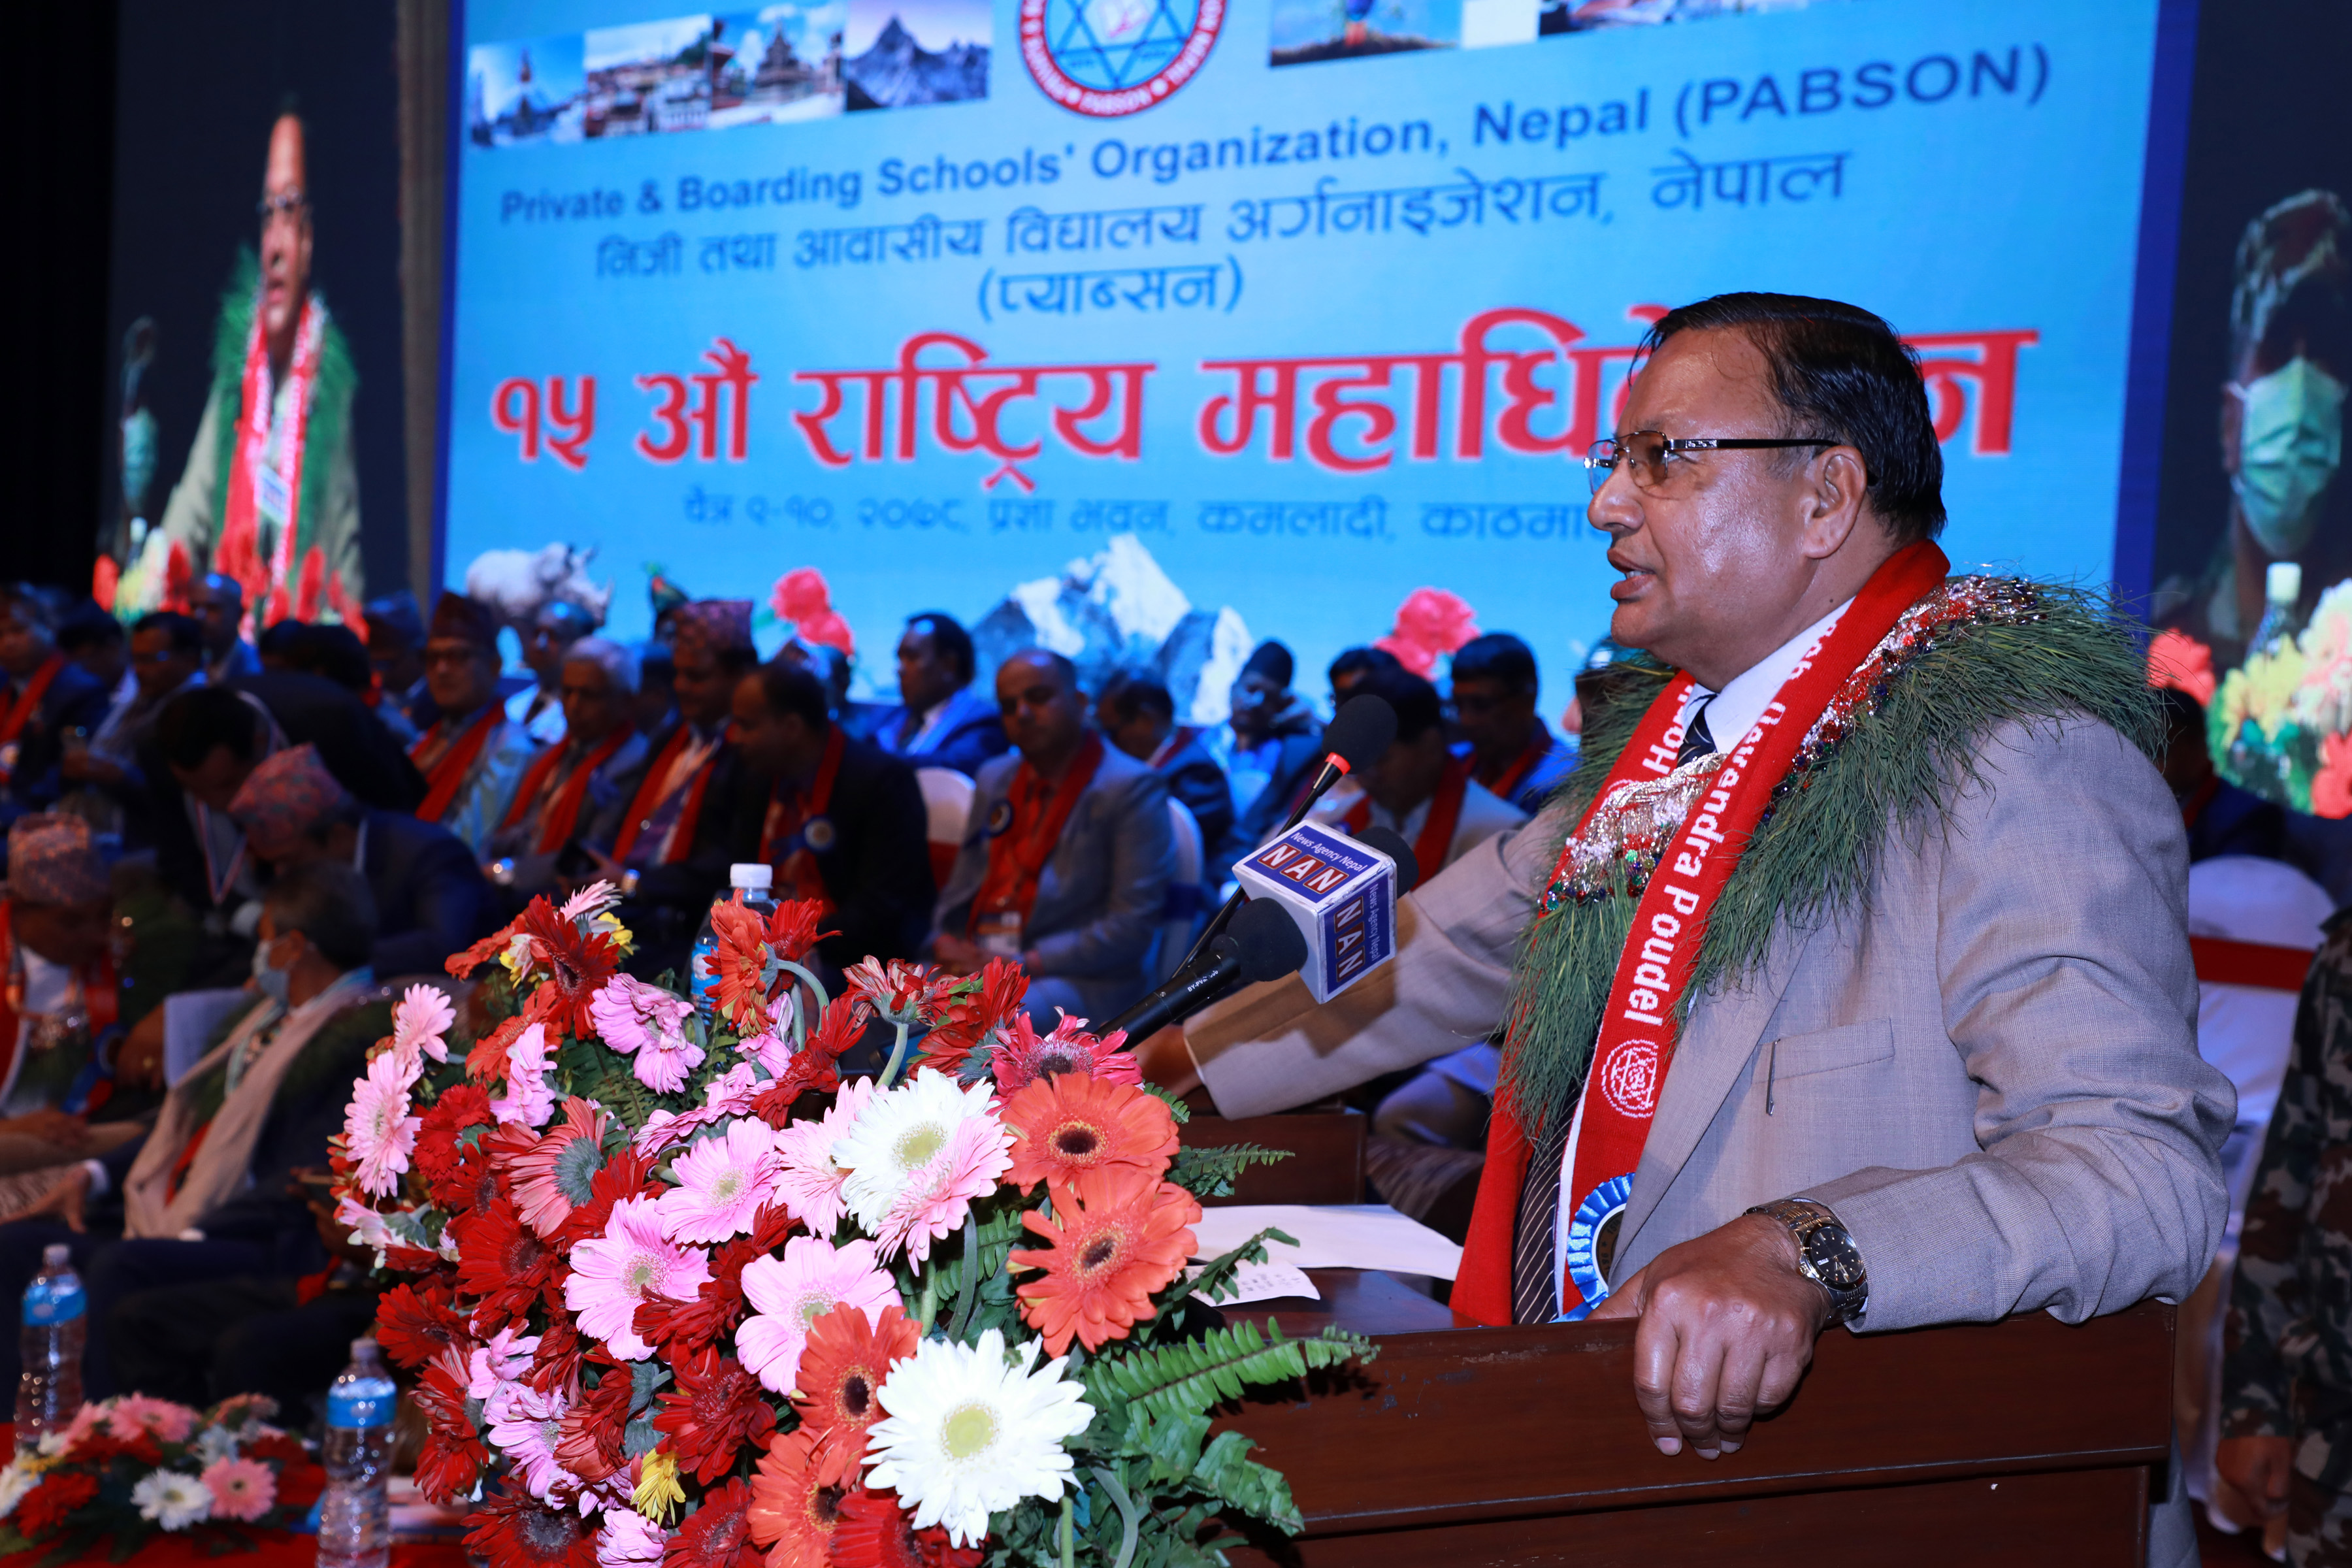 pabsons-15th-national-gathering-commenced